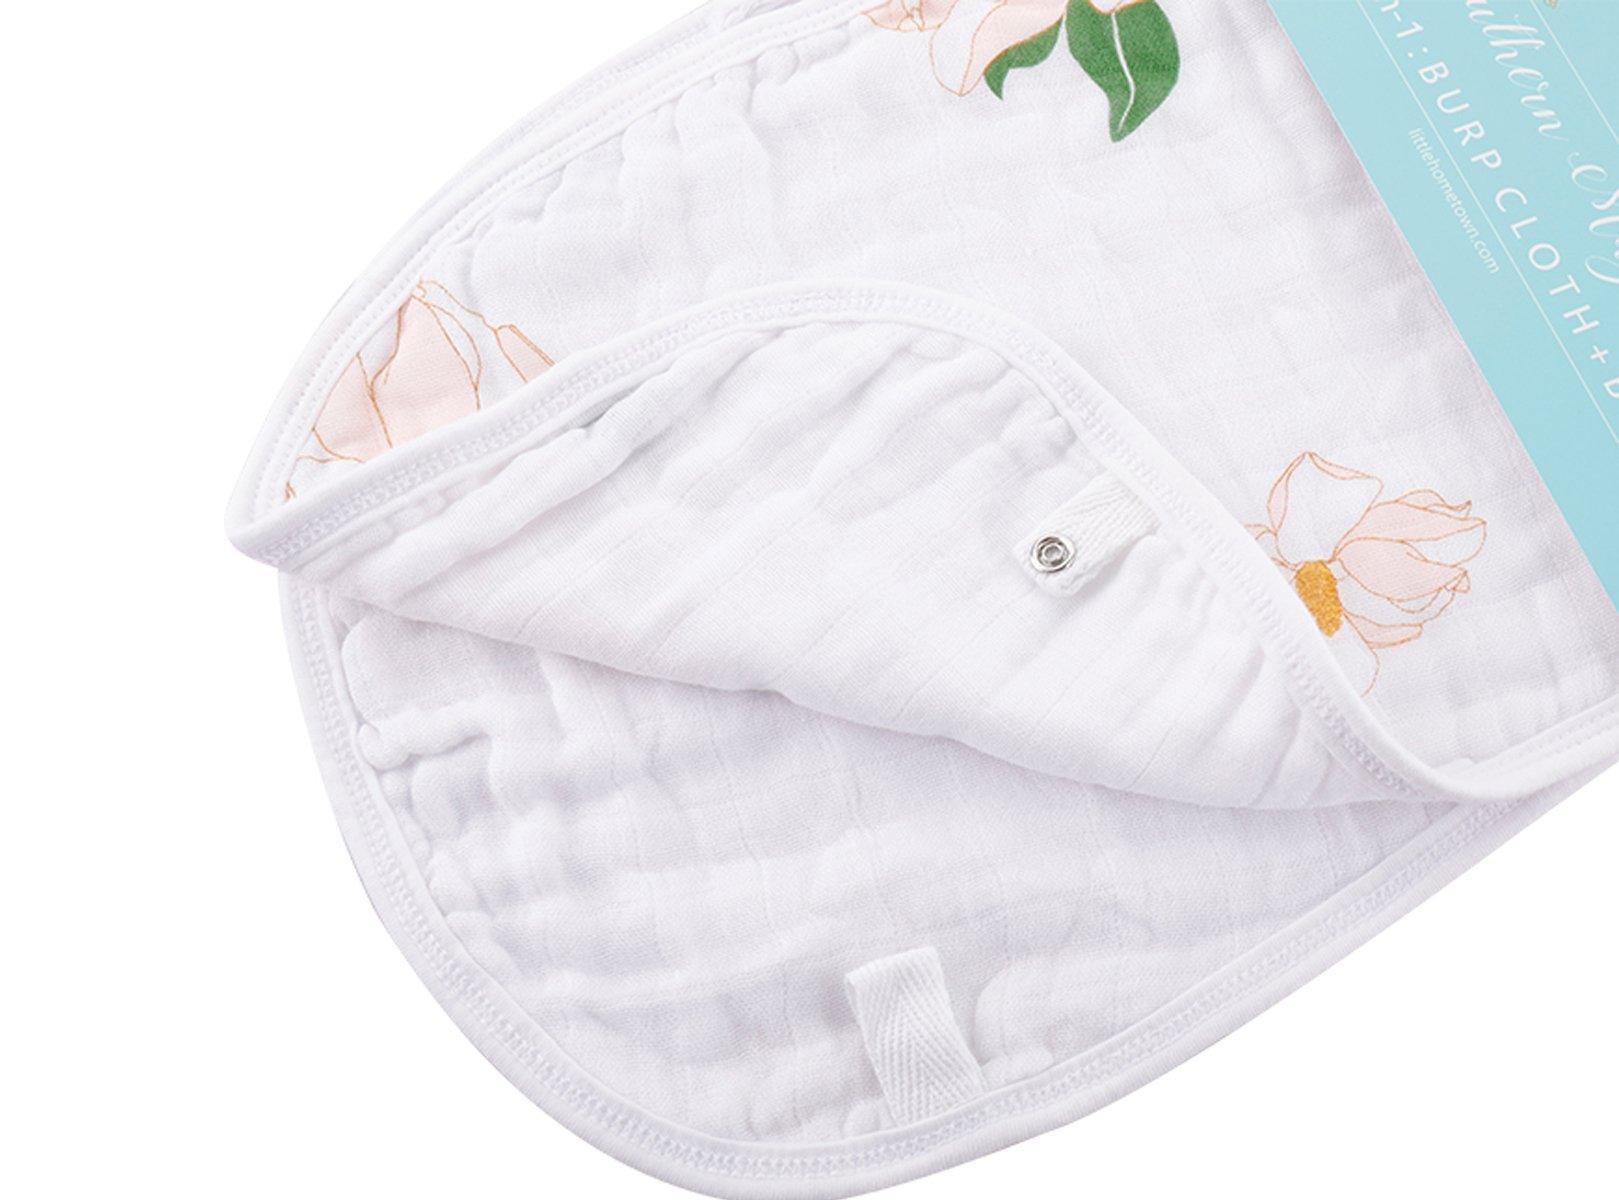 Baby bib and burp cloth set with Southern Magnolia print, featuring delicate white flowers on a soft pink background.